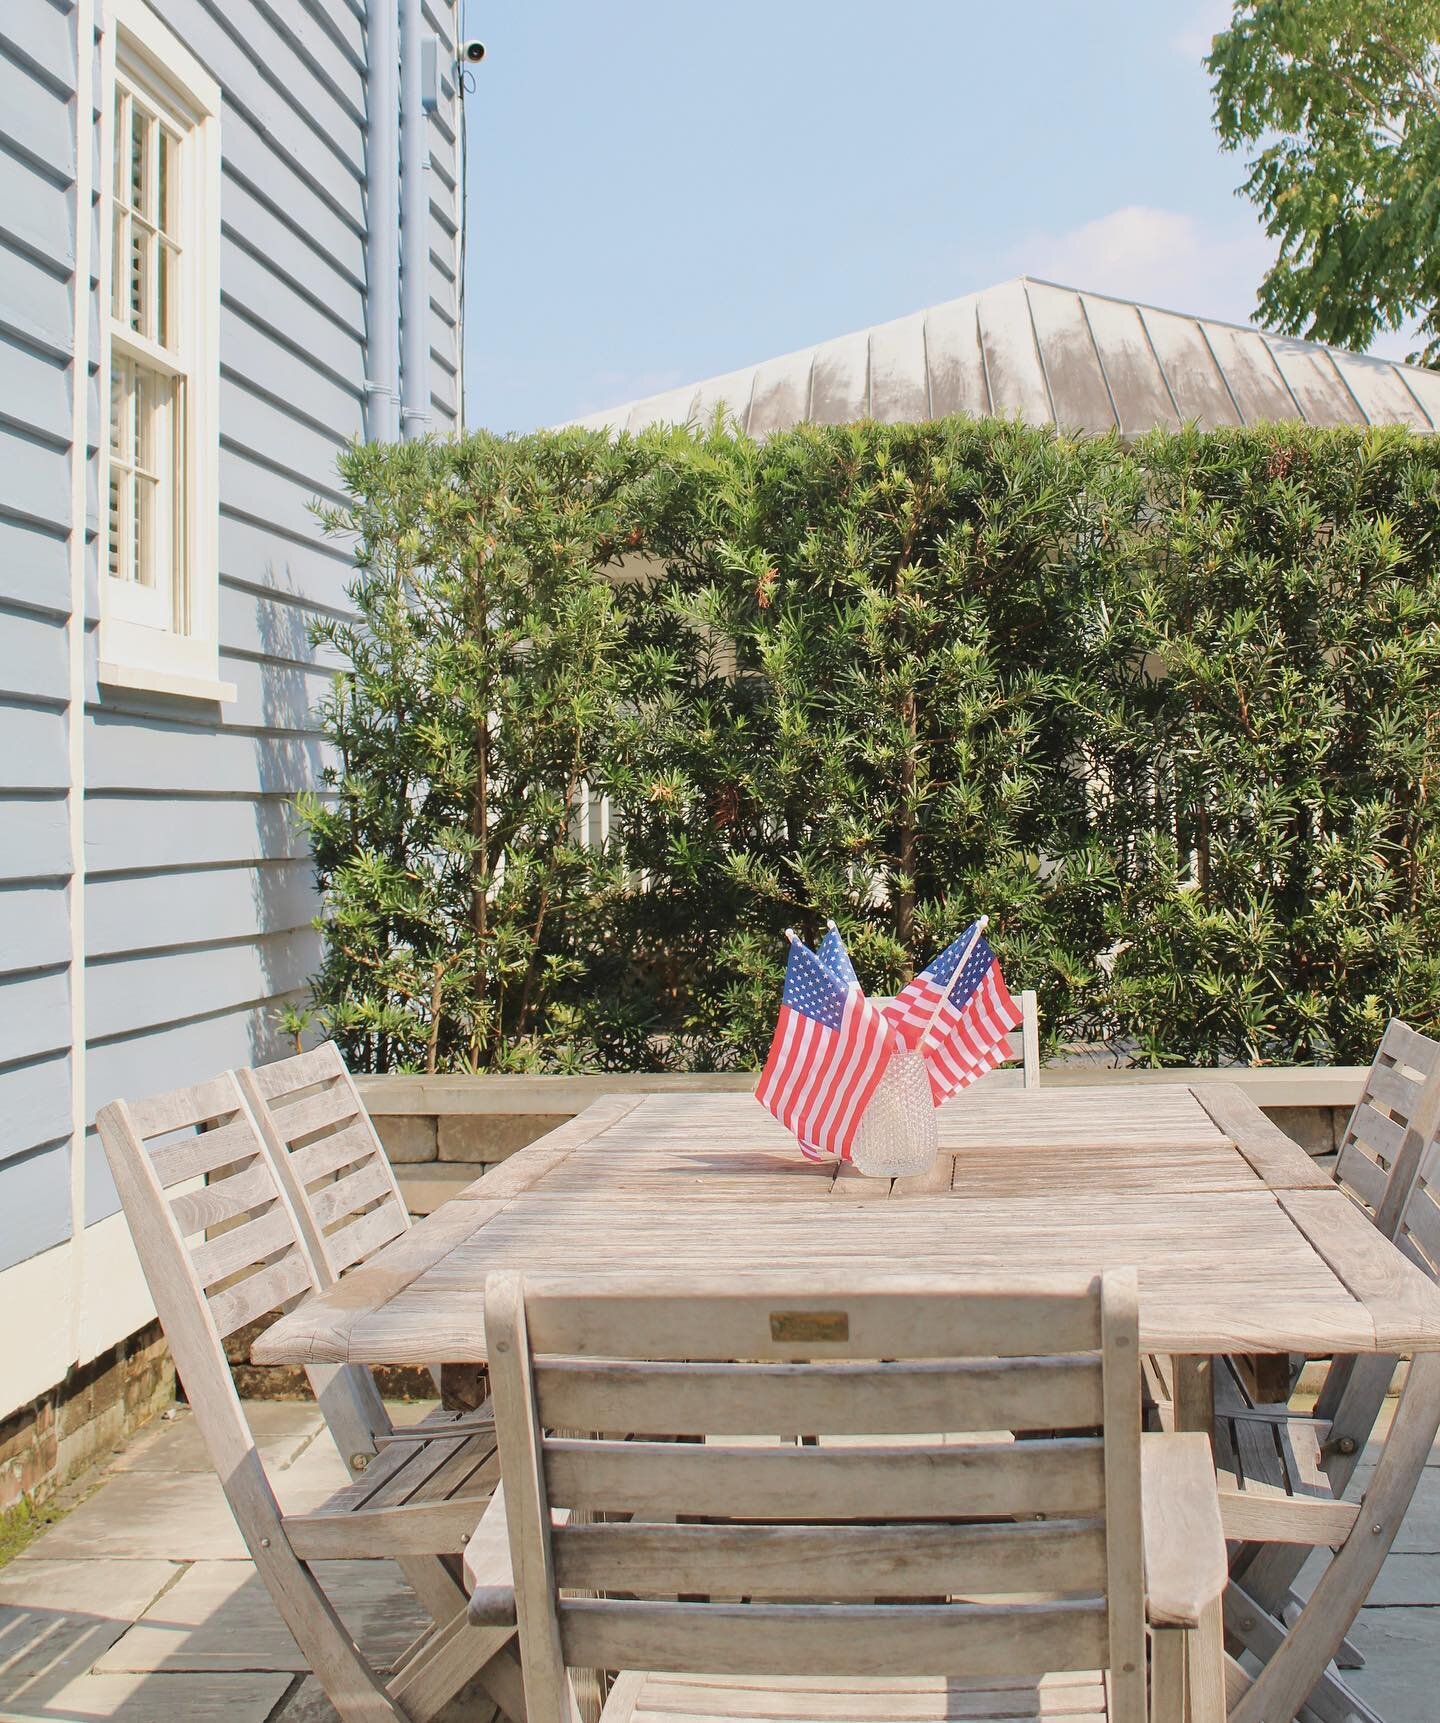 ❤️🤍💙

105A&amp;B | available for the 4th of July weekend with reduced rates🇺🇸

#fourthofjuly #chs #summervacation #luxuryvacationrentals